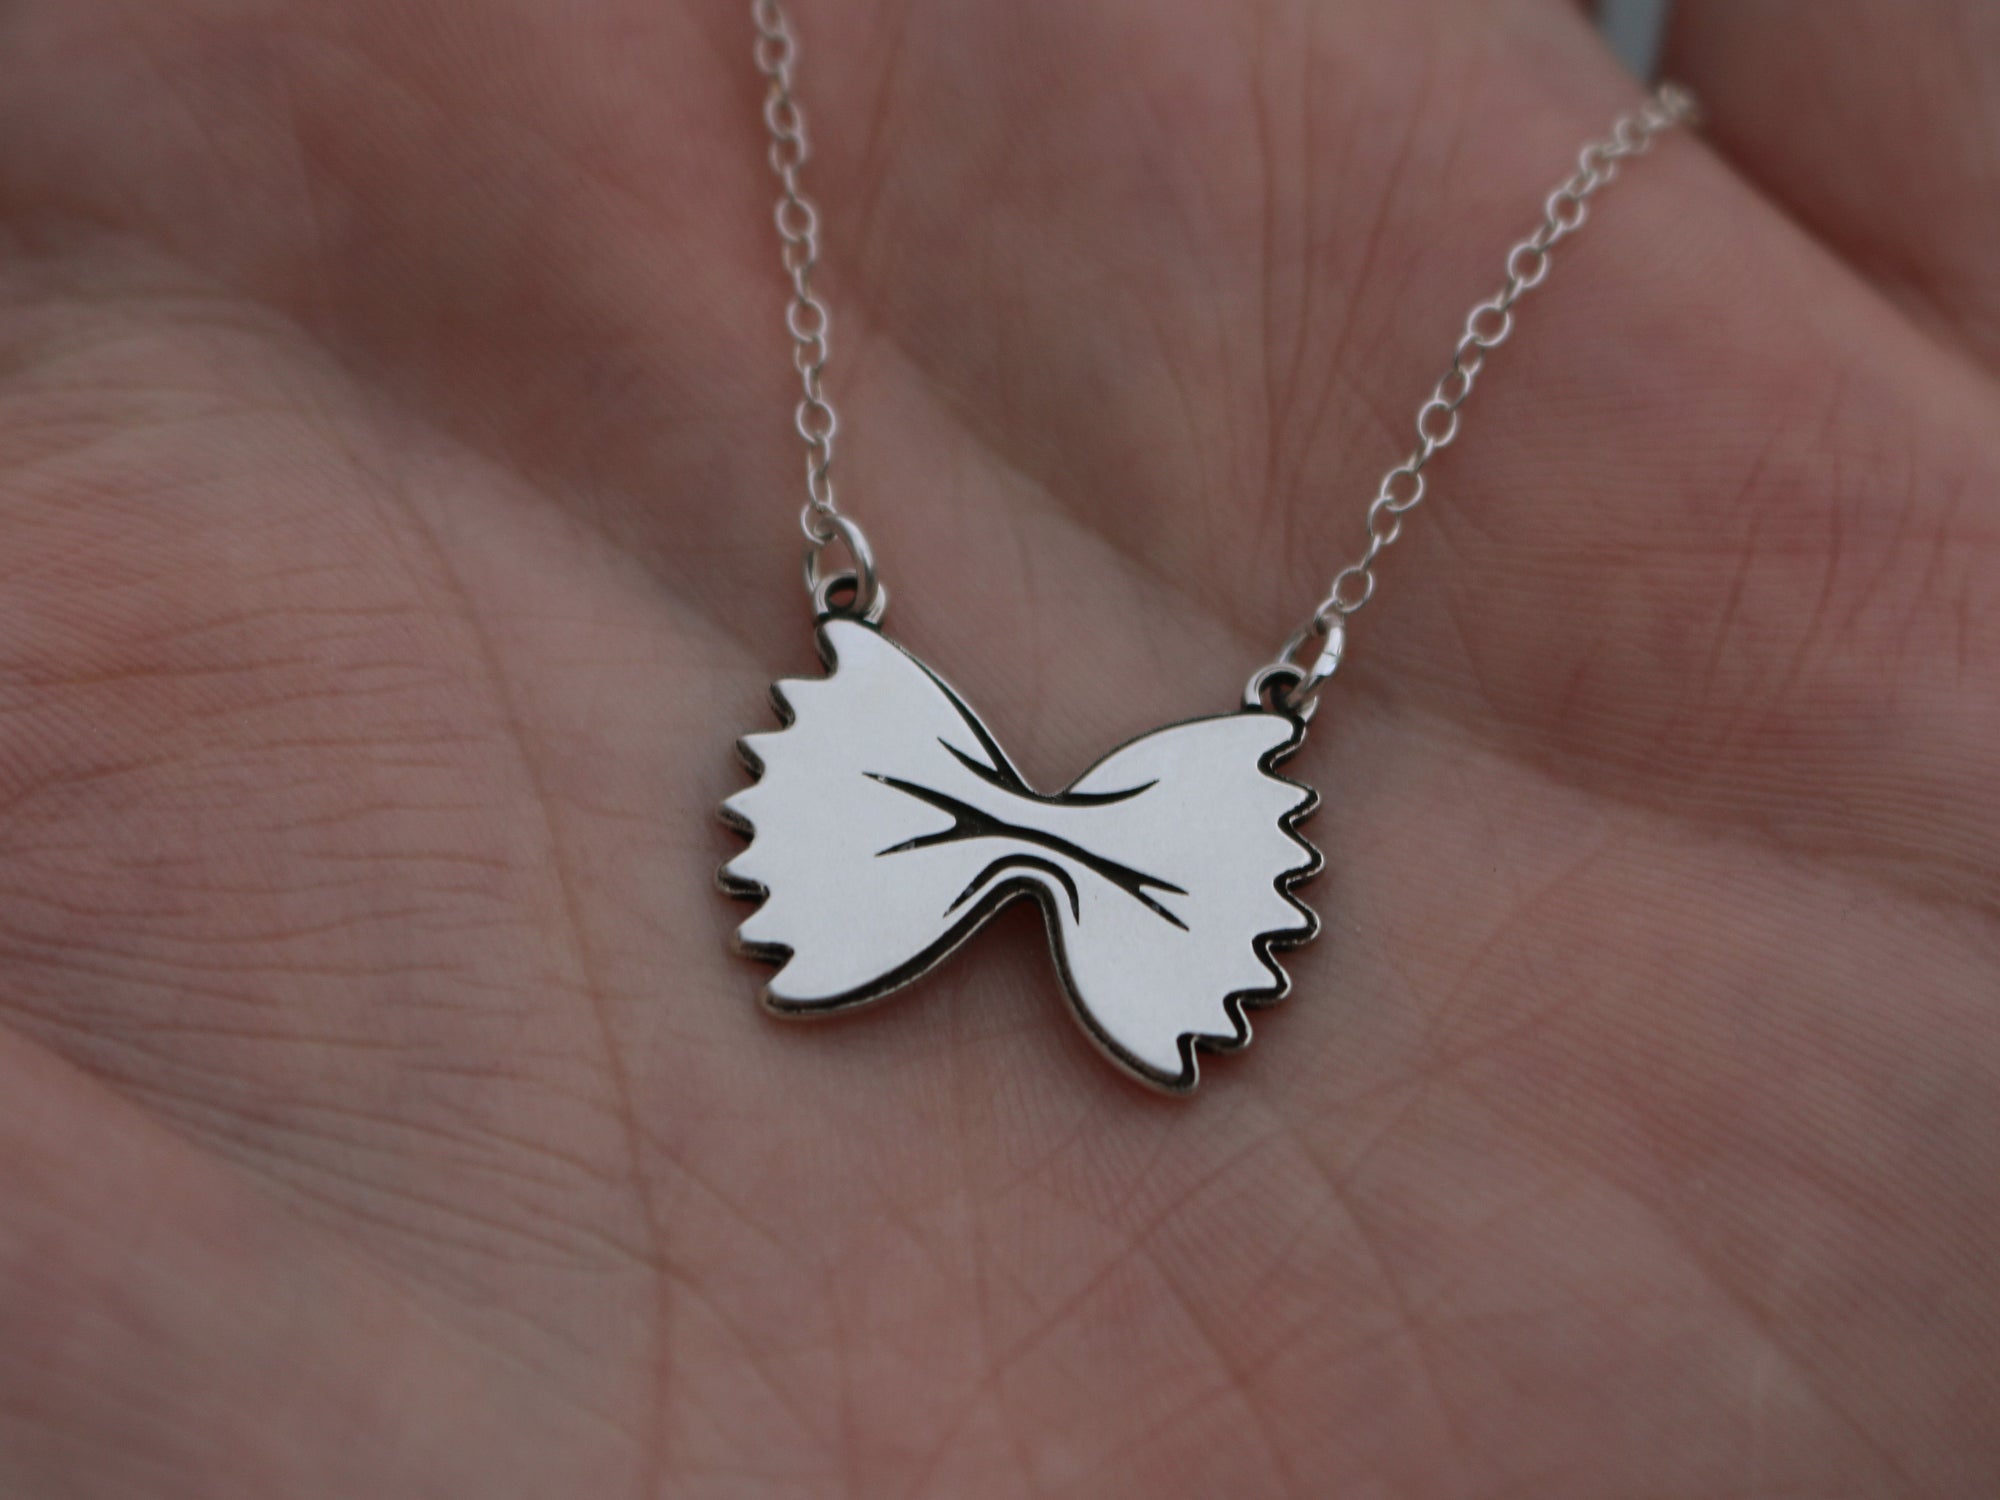 Bow Tie Pasta Necklace - Sterling Silver